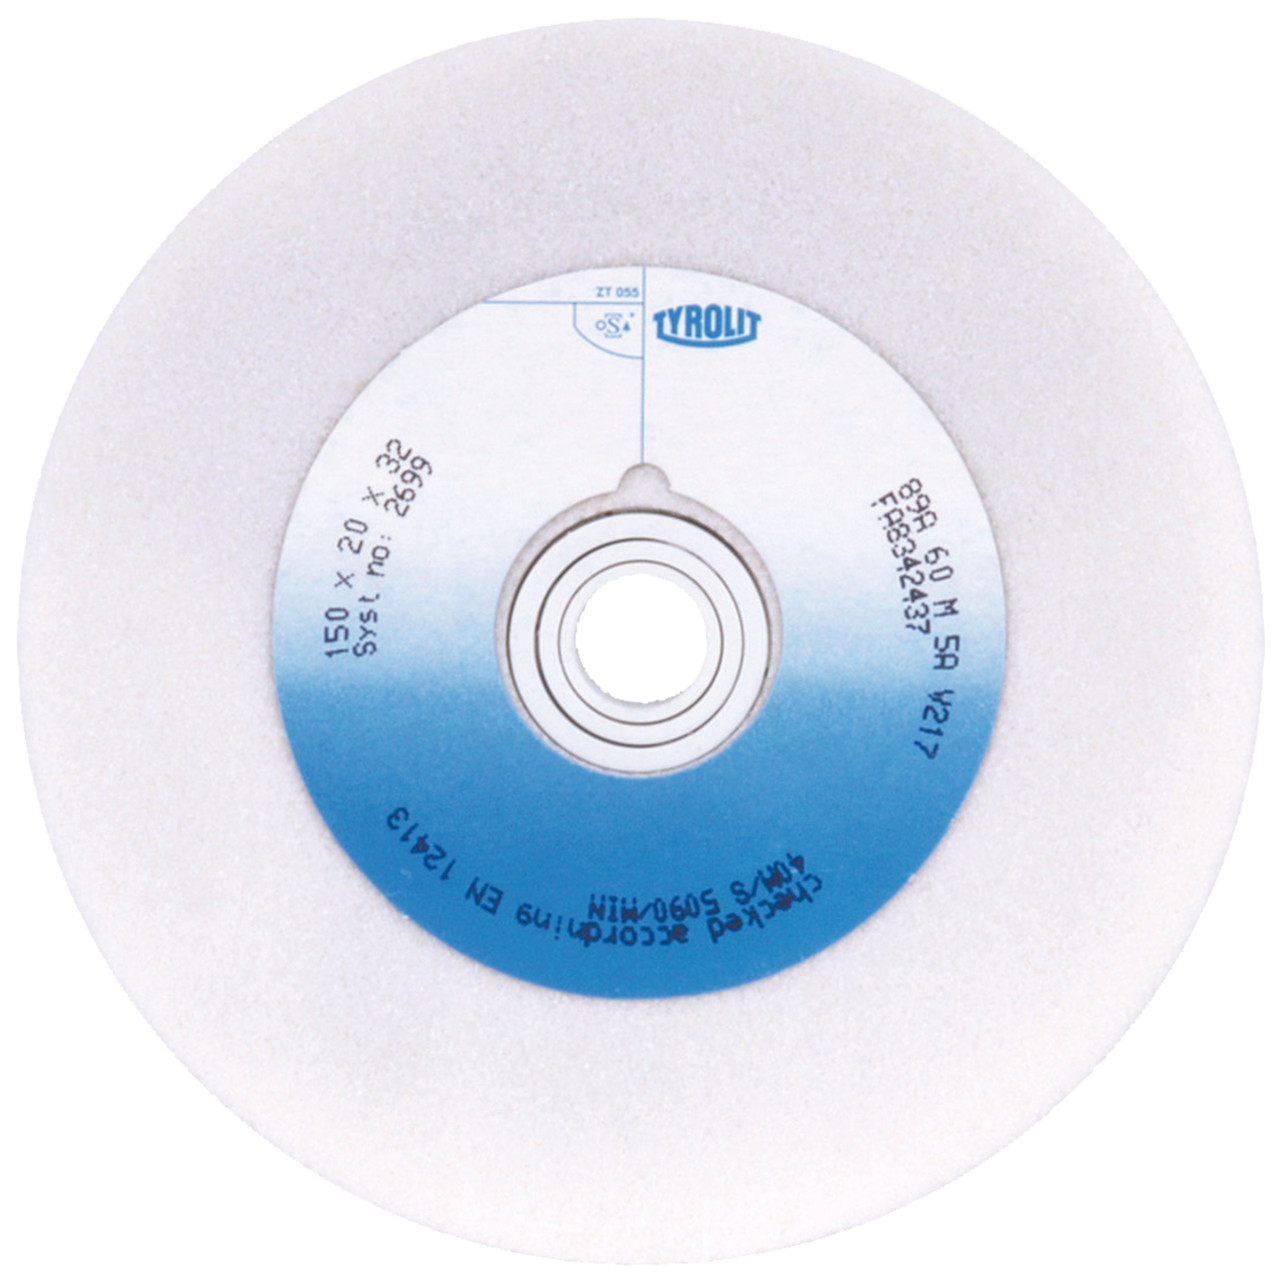 TYROLIT conventional ceramic grinding wheels DxDxH 200x32x40 For high-alloy steels and HSS, shape: 1, Art. 34046791